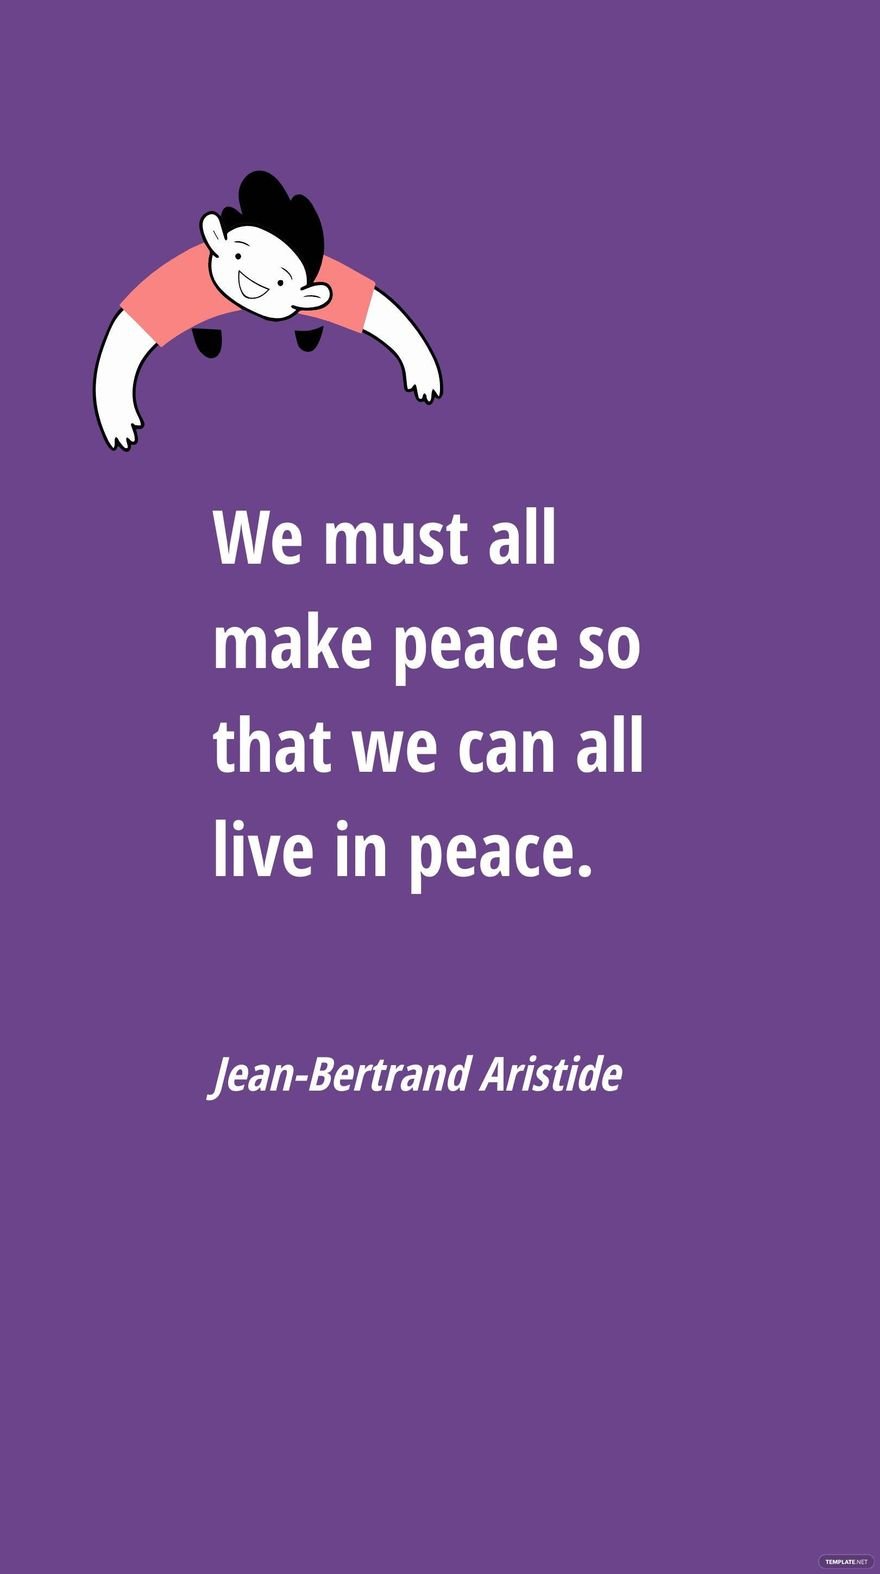 Free Jean-Bertrand Aristide - We must all make peace so that we can all live in peace. in JPG